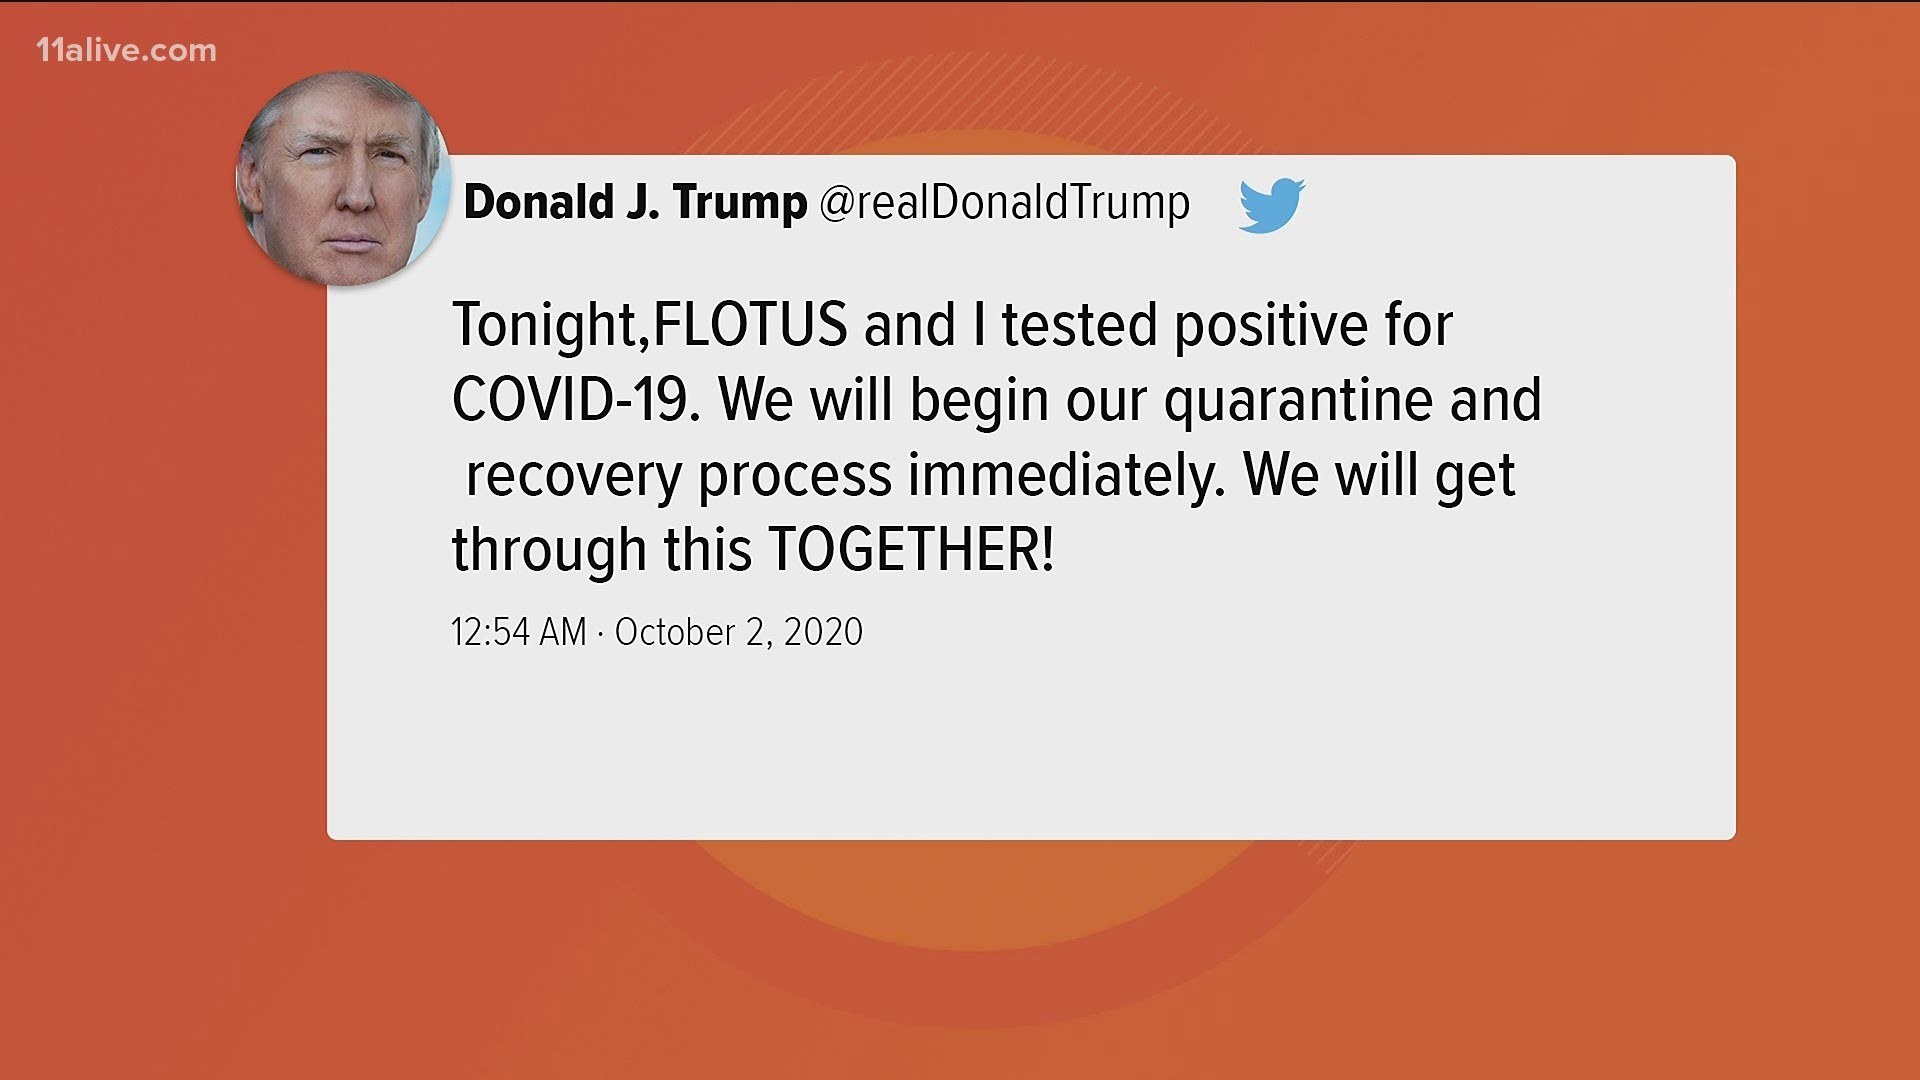 The President and First Lady have both tested positive for COVID-19.